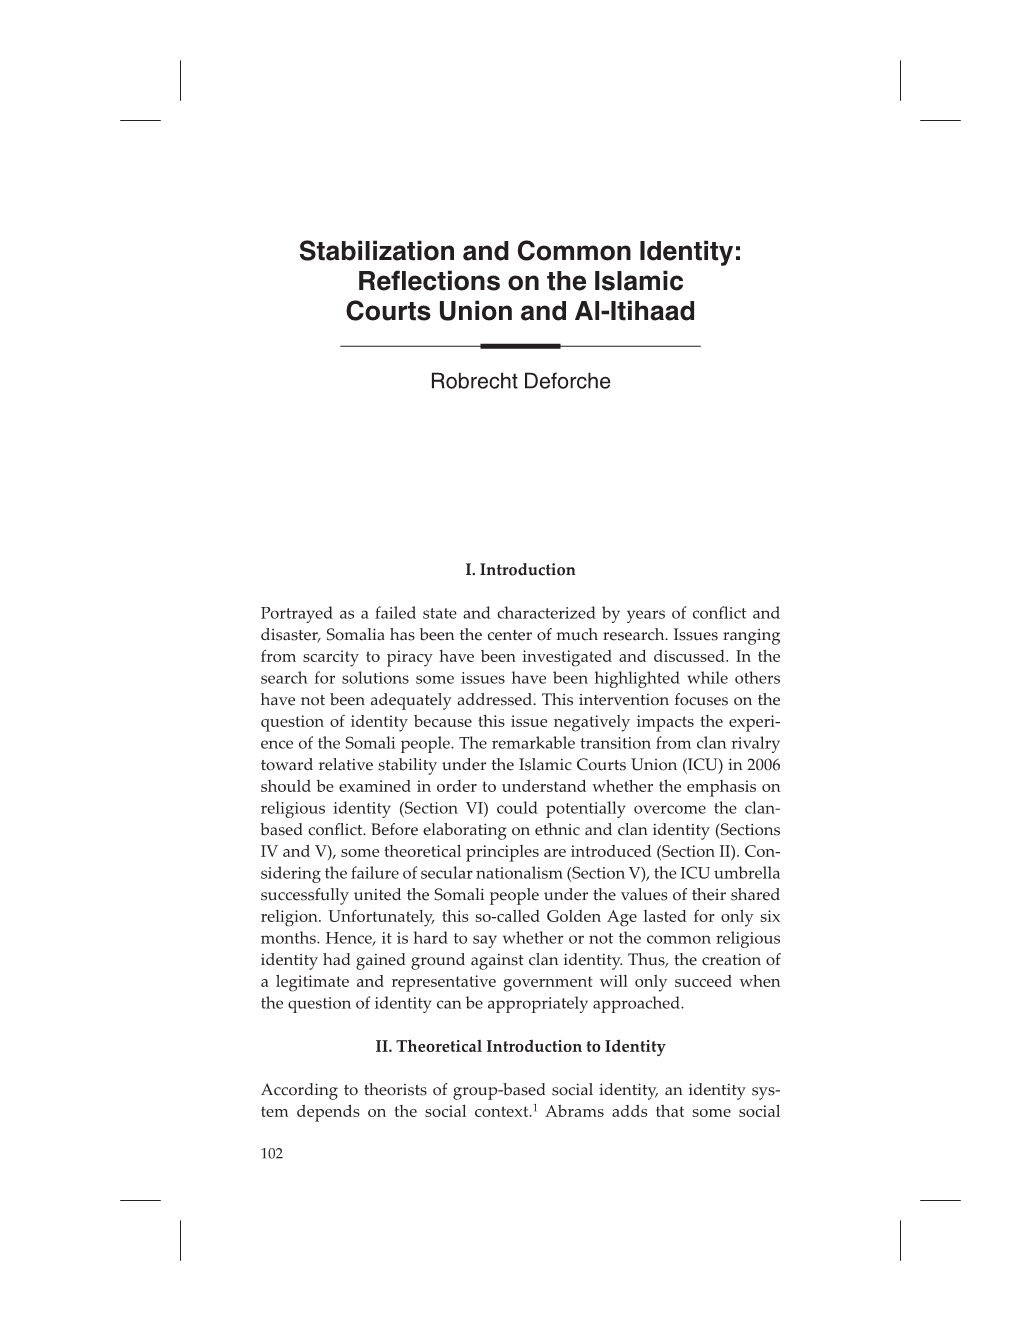 Reflections on the Islamic Courts Union and Al-Itihaad